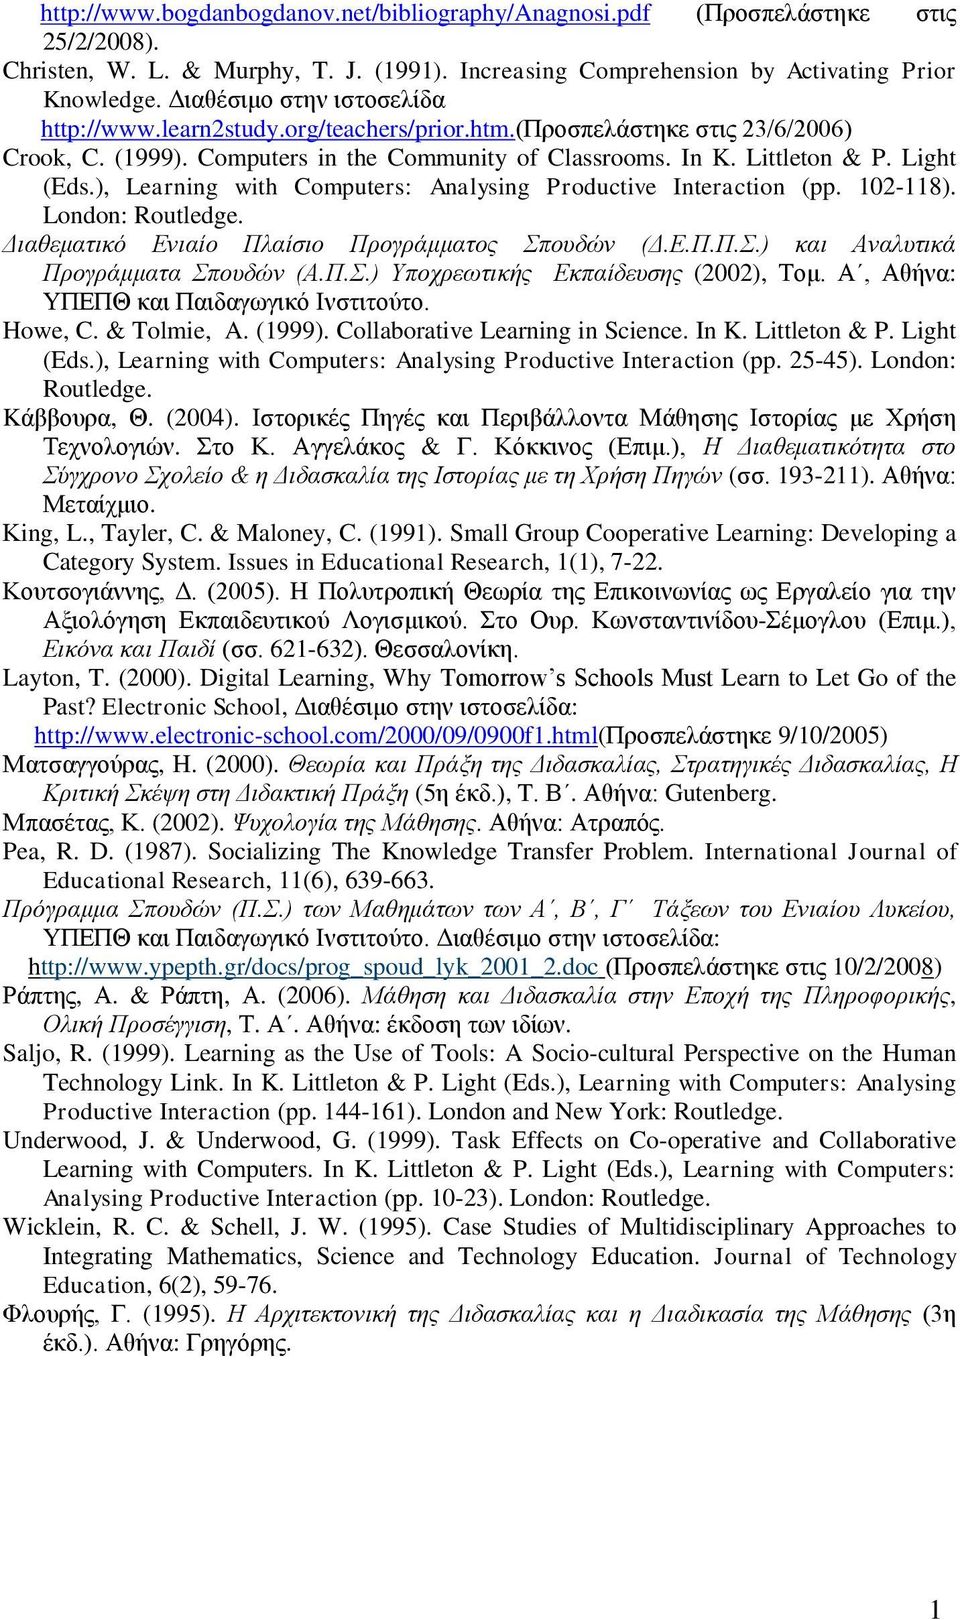 ), Learning with Computers: Analysing Productive Interaction (pp. 102-118). London: Routledge. Γηαζεκαηηθό Δληαίν Πιαίζην Πξνγξάκκαηνο Σπνπδώλ (Γ.Δ.Π.Π.Σ.) θαη Αλαιπηηθά Πξνγξάκκαηα Σπνπδώλ (Α.Π.Σ.) Υπνρξεσηηθήο Δθπαίδεπζεο (2002), Σνκ.